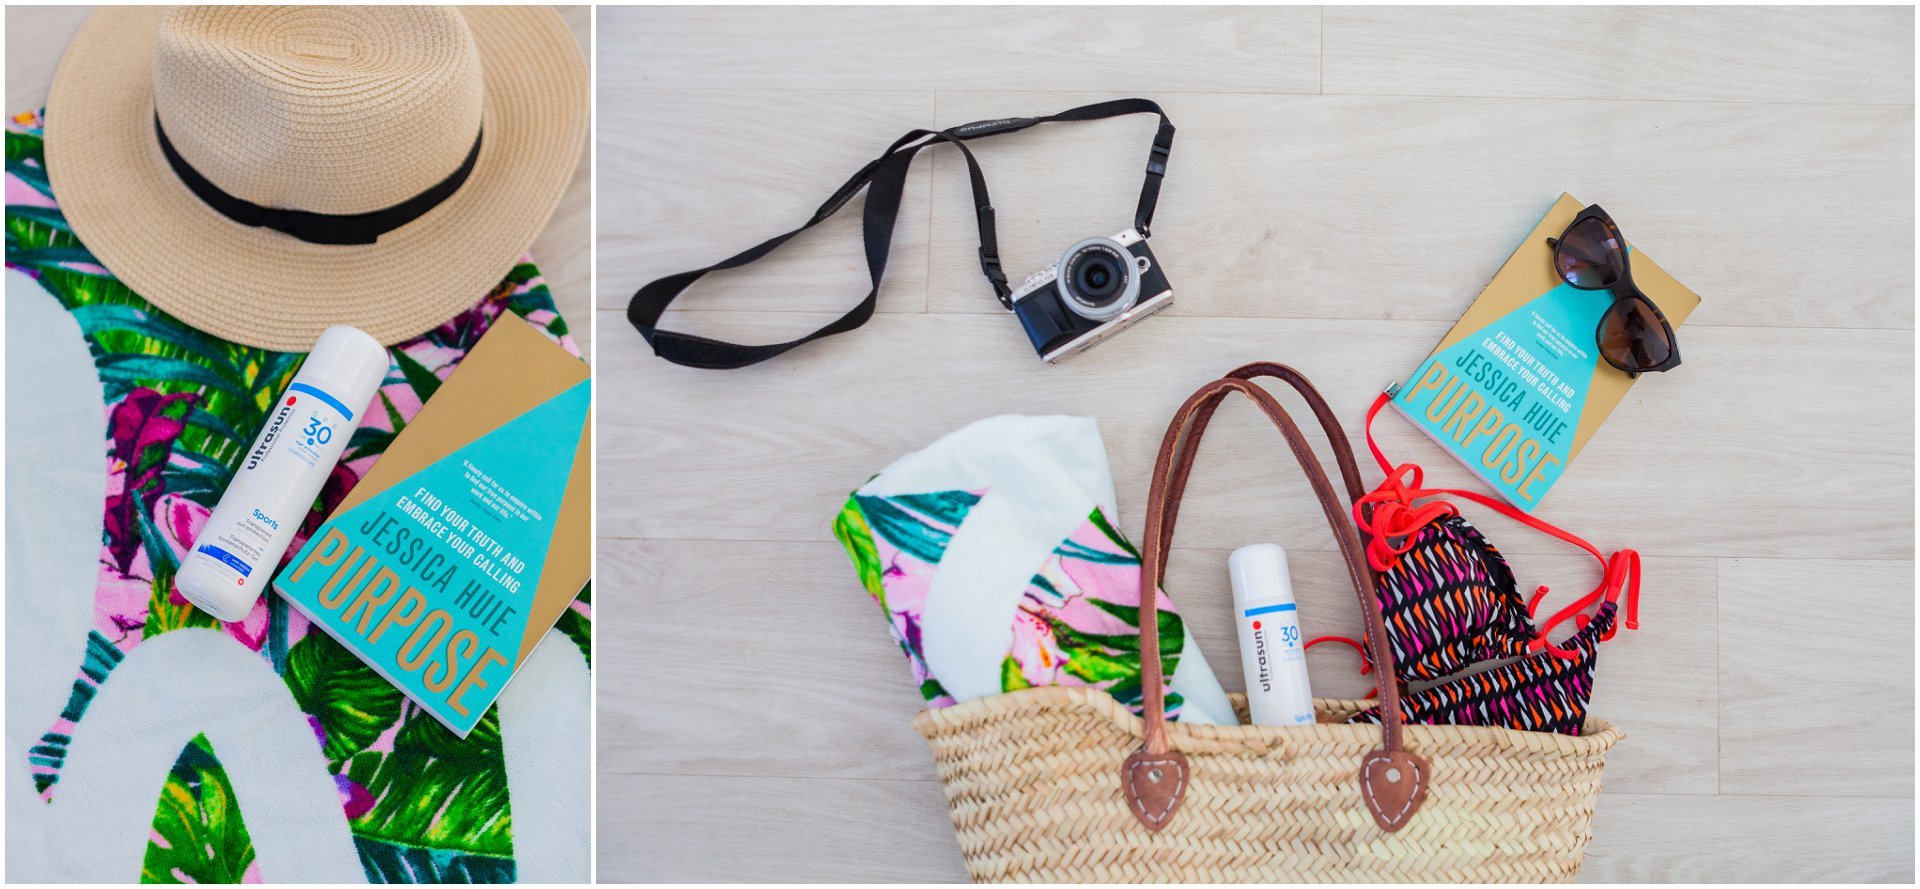 honeymoon beach accessories with Nu Bride and Prezola - london product photography - AKP Branding Stories